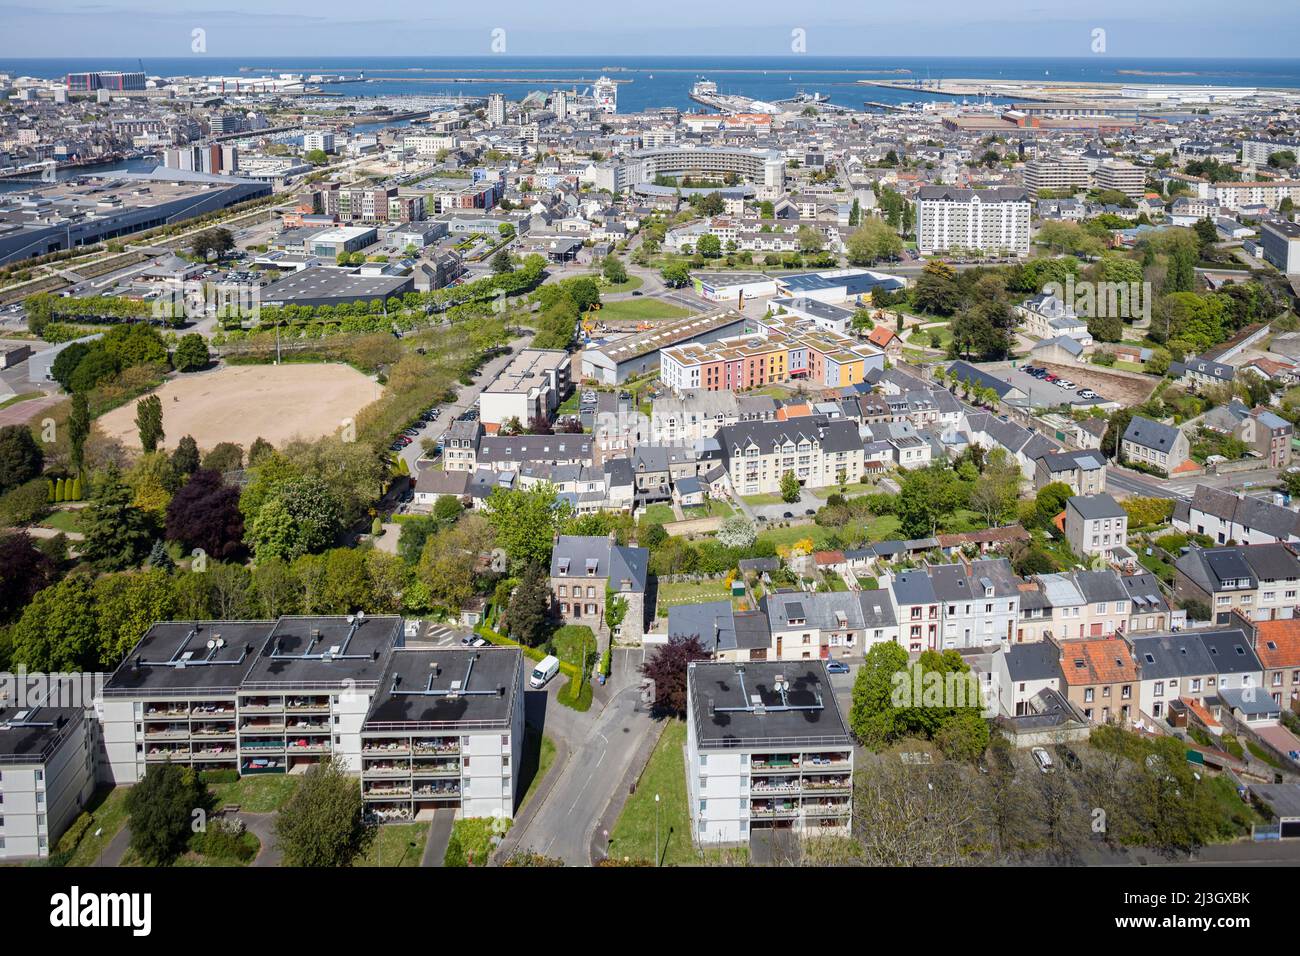 France, Manche, Cotentin, Cherbourg-Octeville, general view of the public garden, the basins, the shipyard, the hospital and the residential areas at the foot of the Fort du Roule Stock Photo